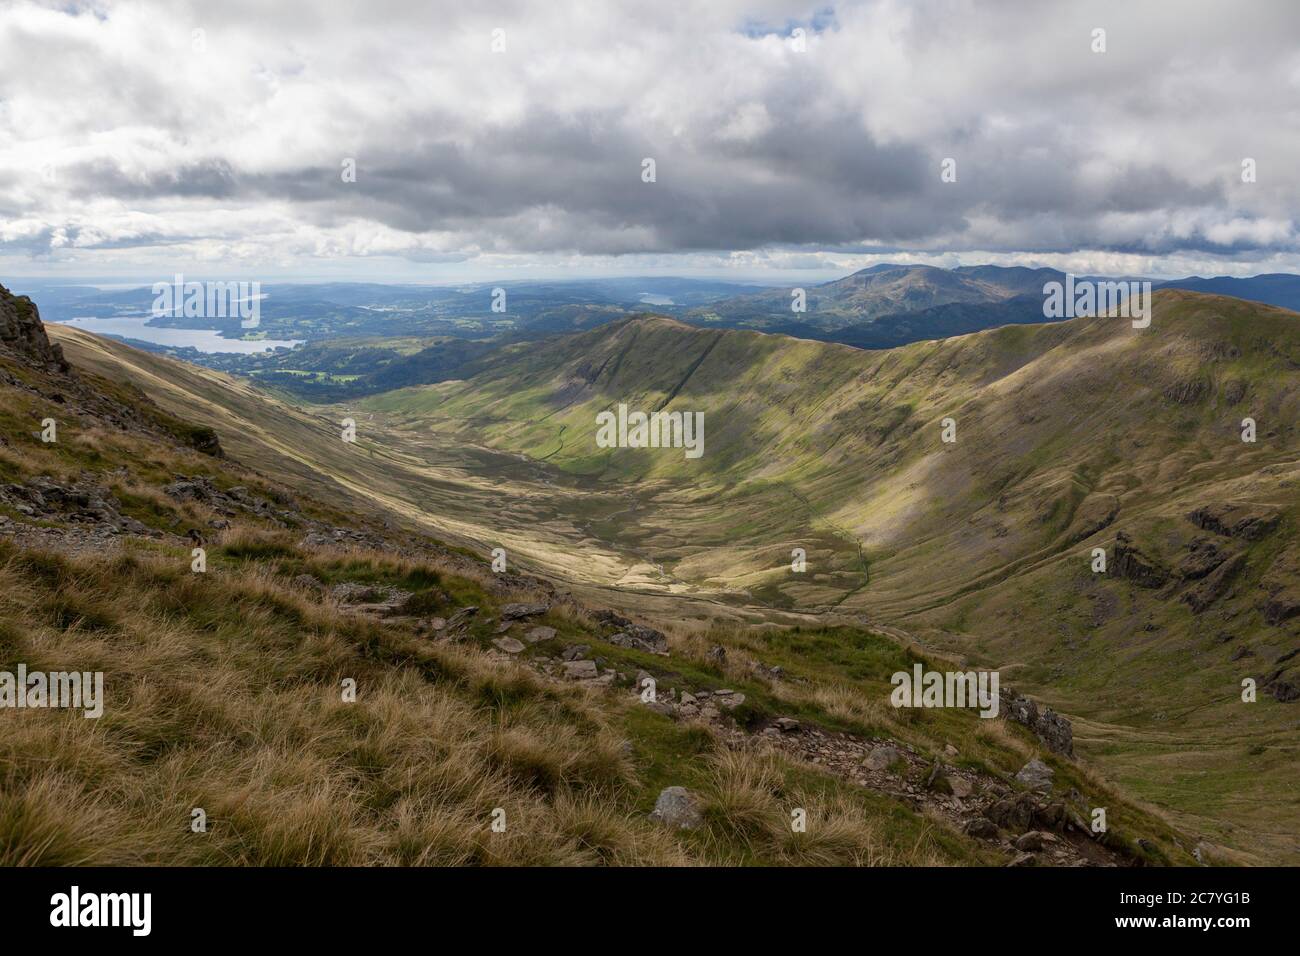 Summer view of the valley of Rydal Beck from Fairfield with Great Rigg, Heron pike and Windermere visible Stock Photo